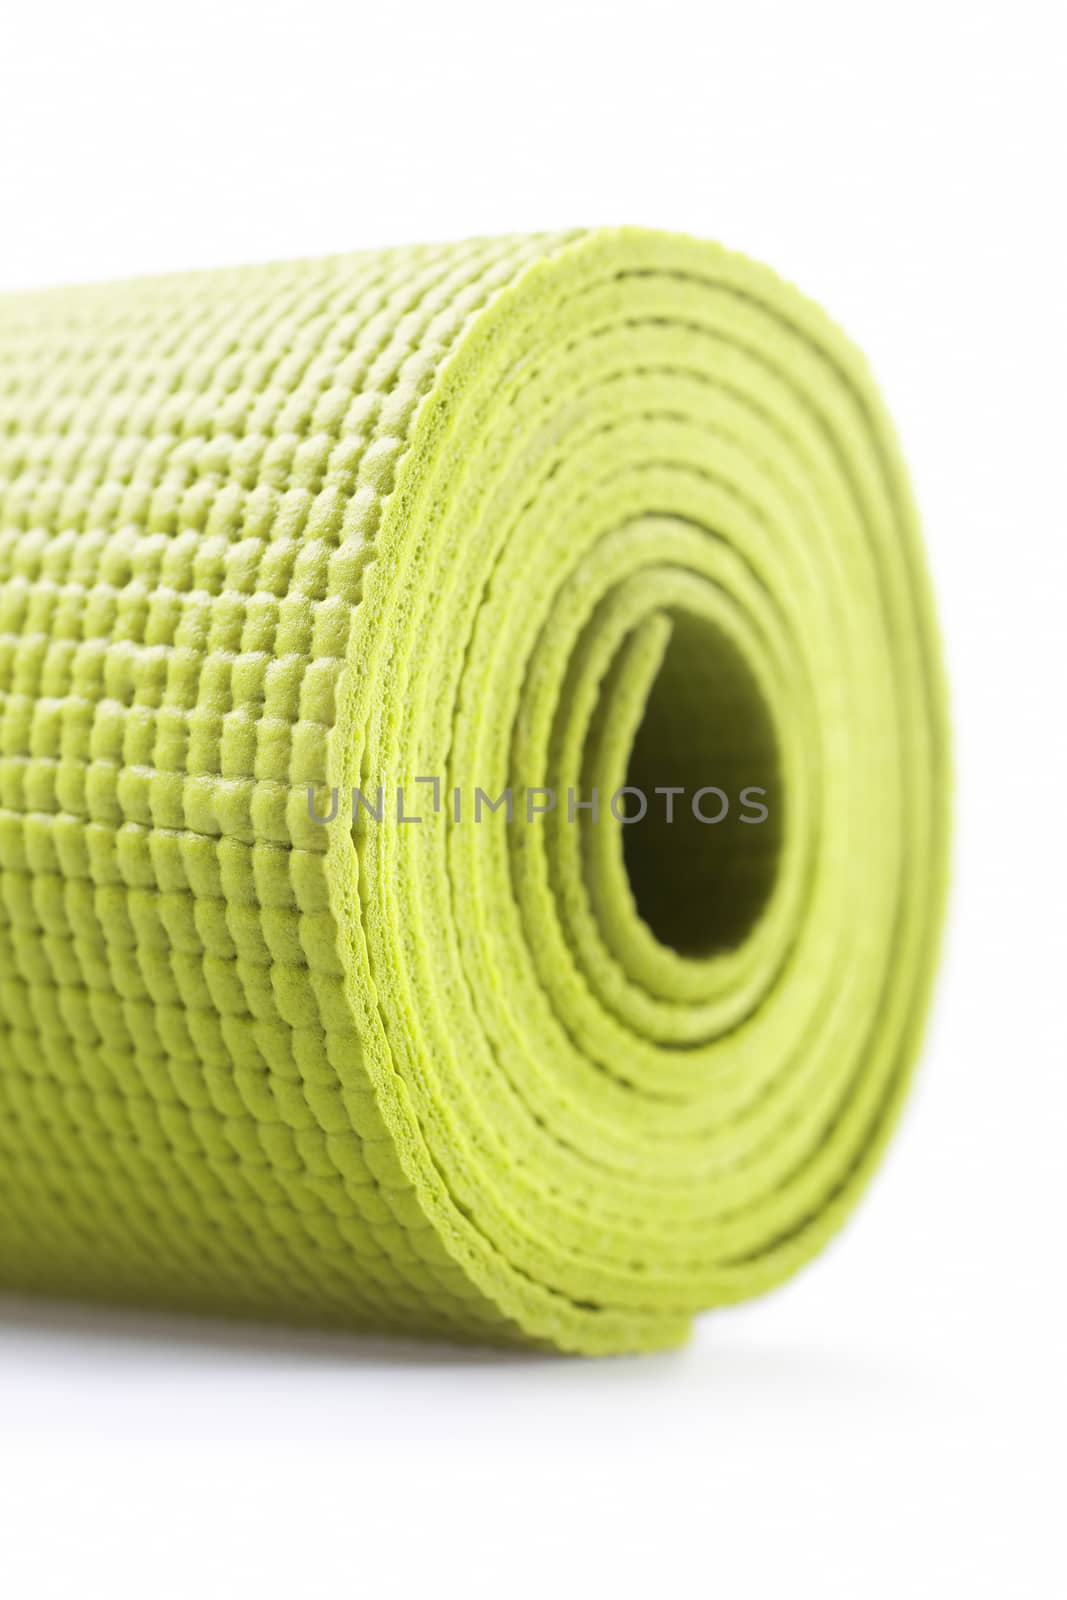 Green exercise mat isolated on white background. 